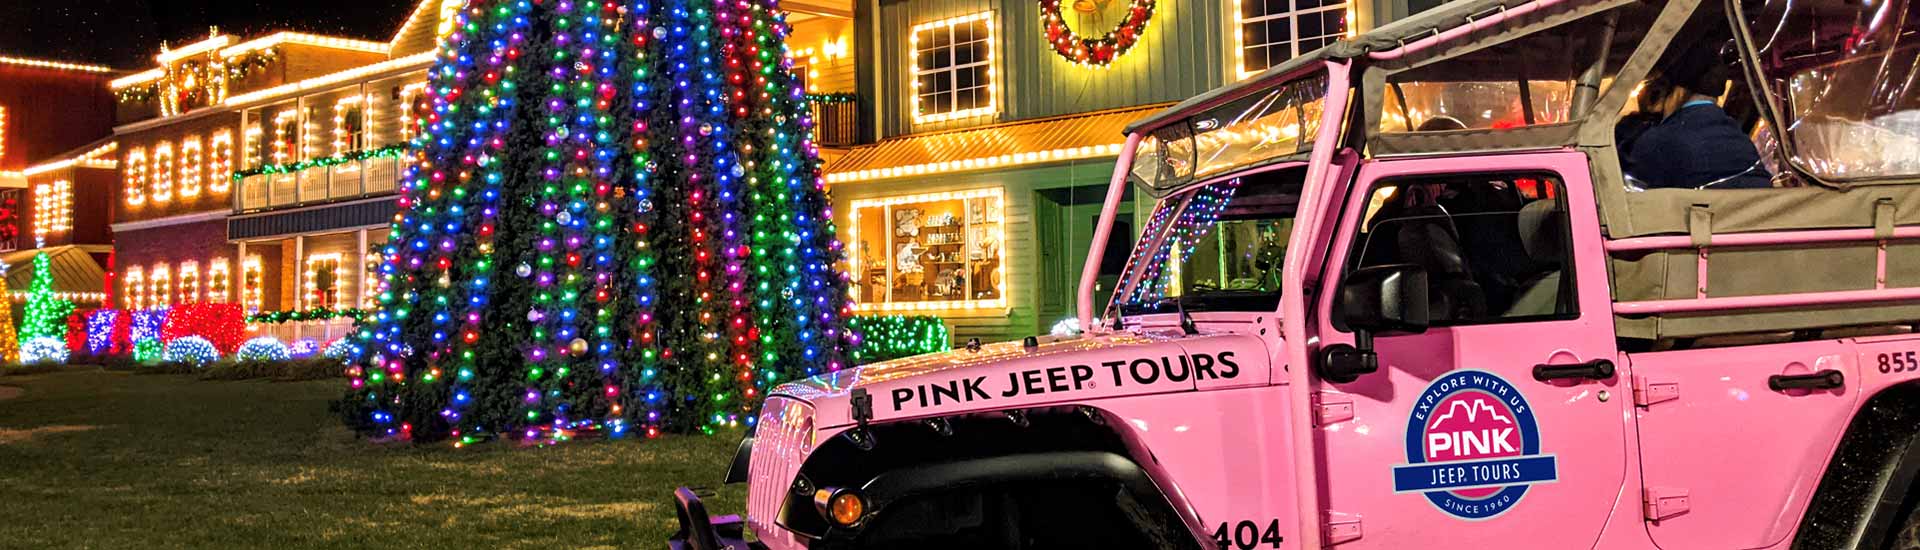 Horizontal close-up of side of Pink Jeep Tours' Jeep Wrangler in front of lighted Christmas display at Dolly Parton's Stampede, Pigeon Forge.